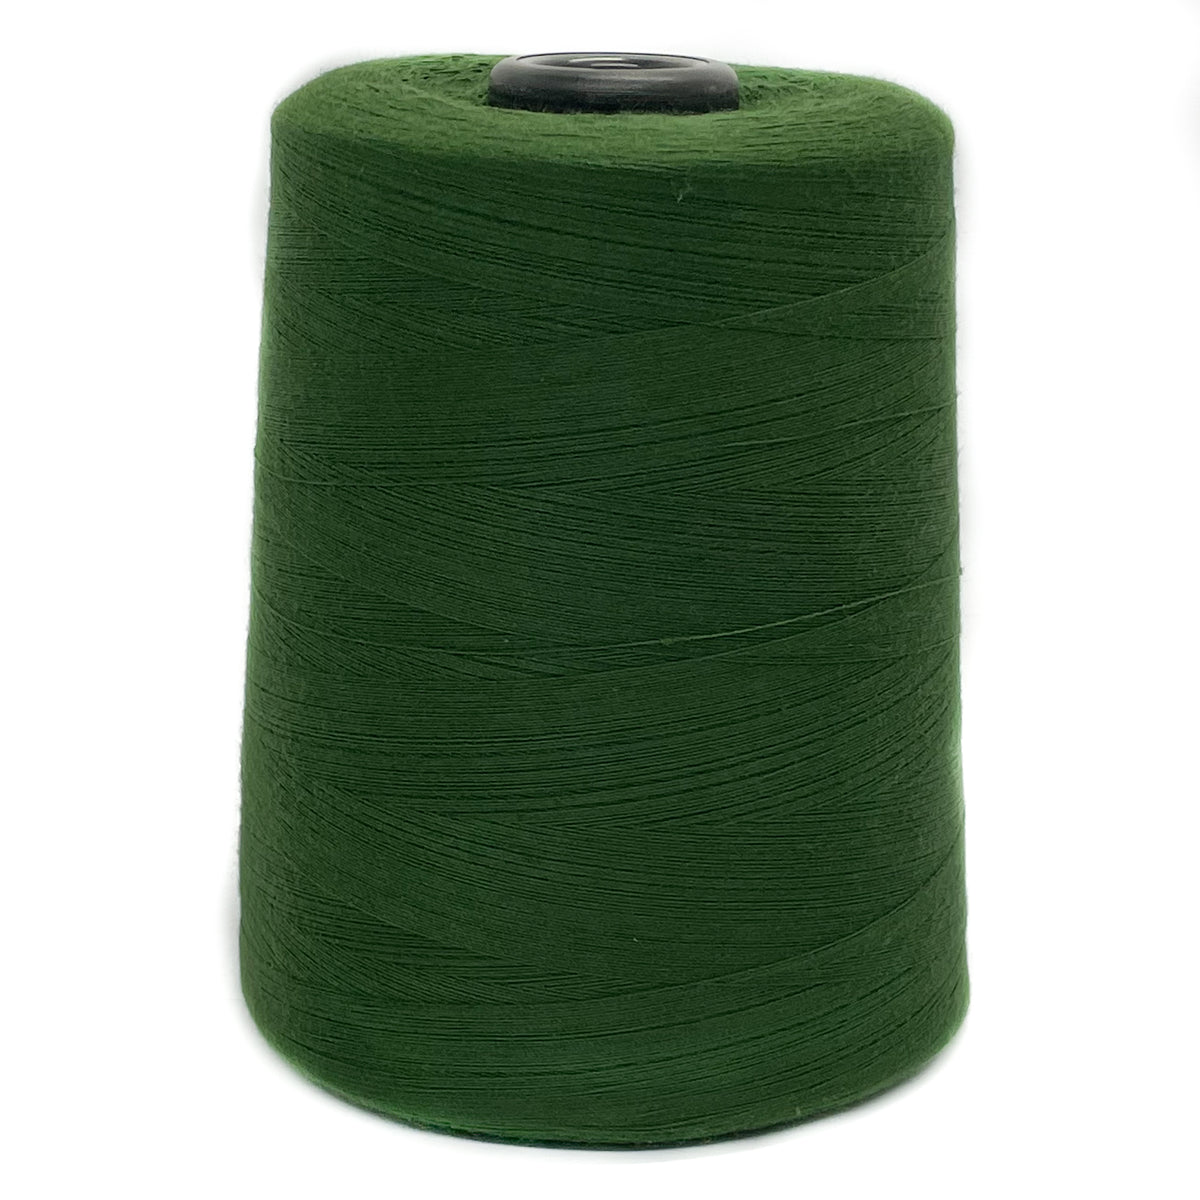  Sewing Threads Kits,Green Polyester Sewing Thread 10 Rolls  Sewing Thread 1000 Yards Per Spool Bobbin Thread for Sewing Household